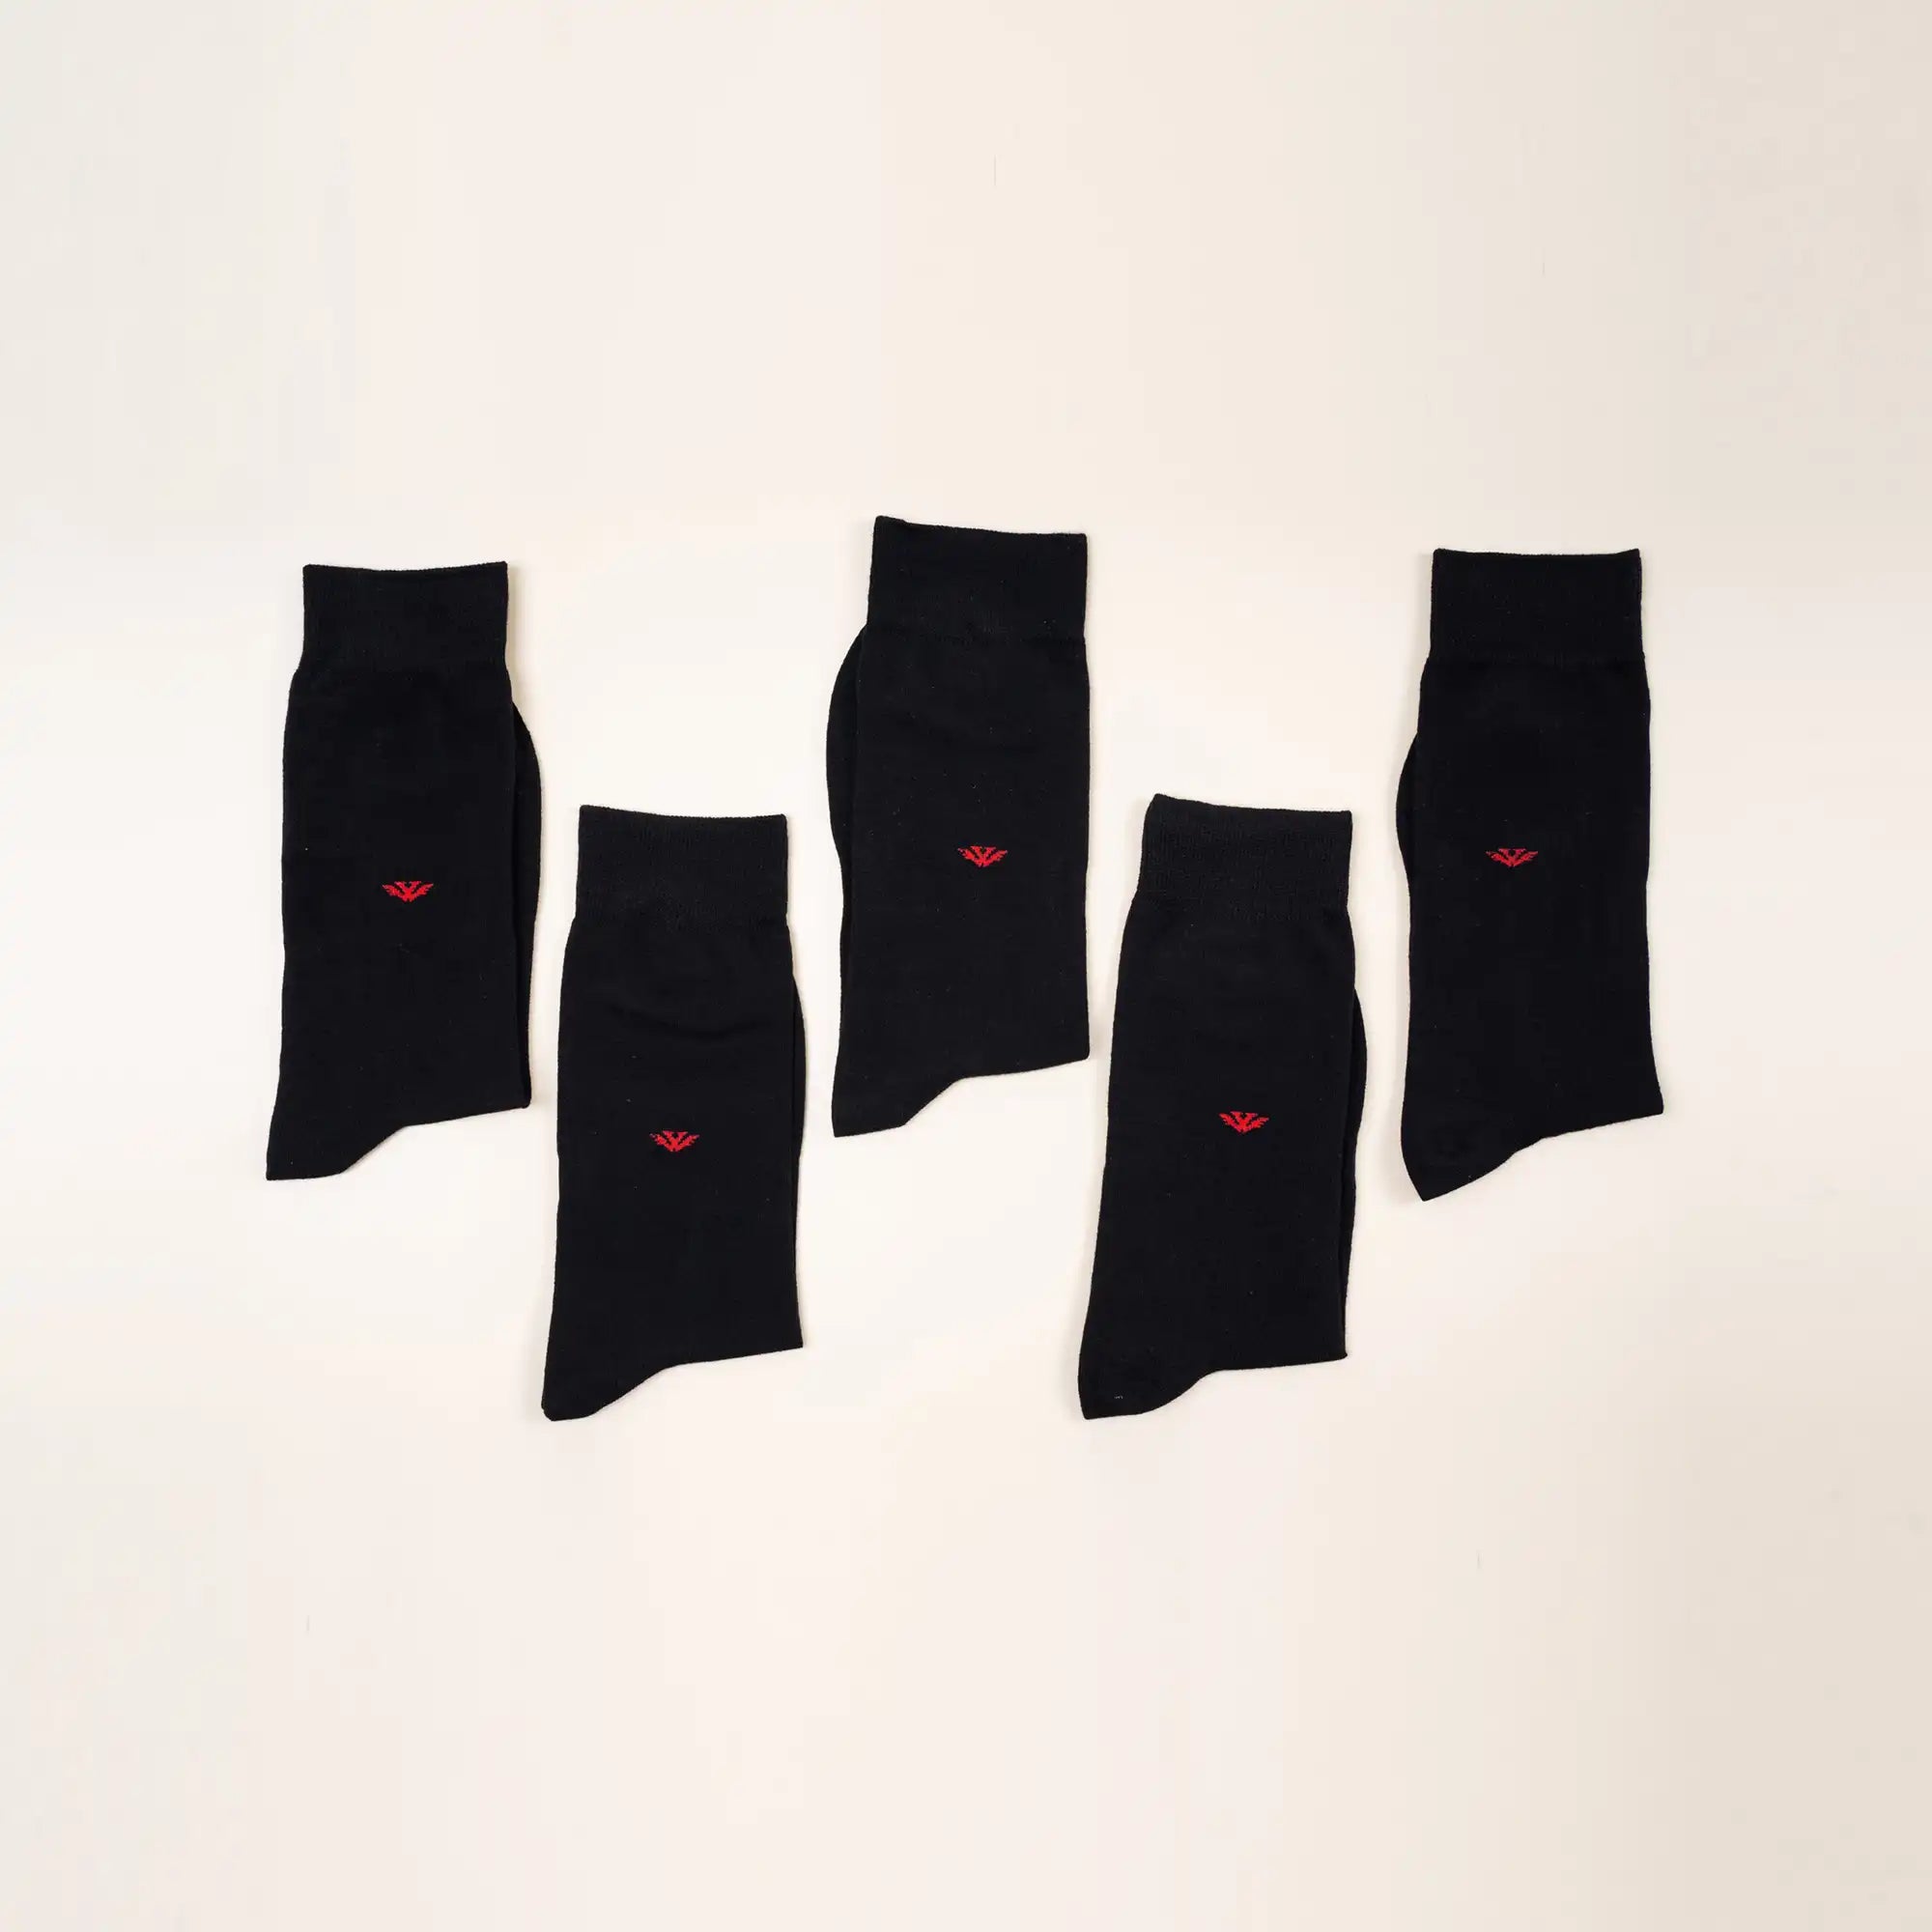 Young Wings Men's Black Colour Cotton Fabric Solid Full Length Socks - Pack of 5, Style no. 3400-M1